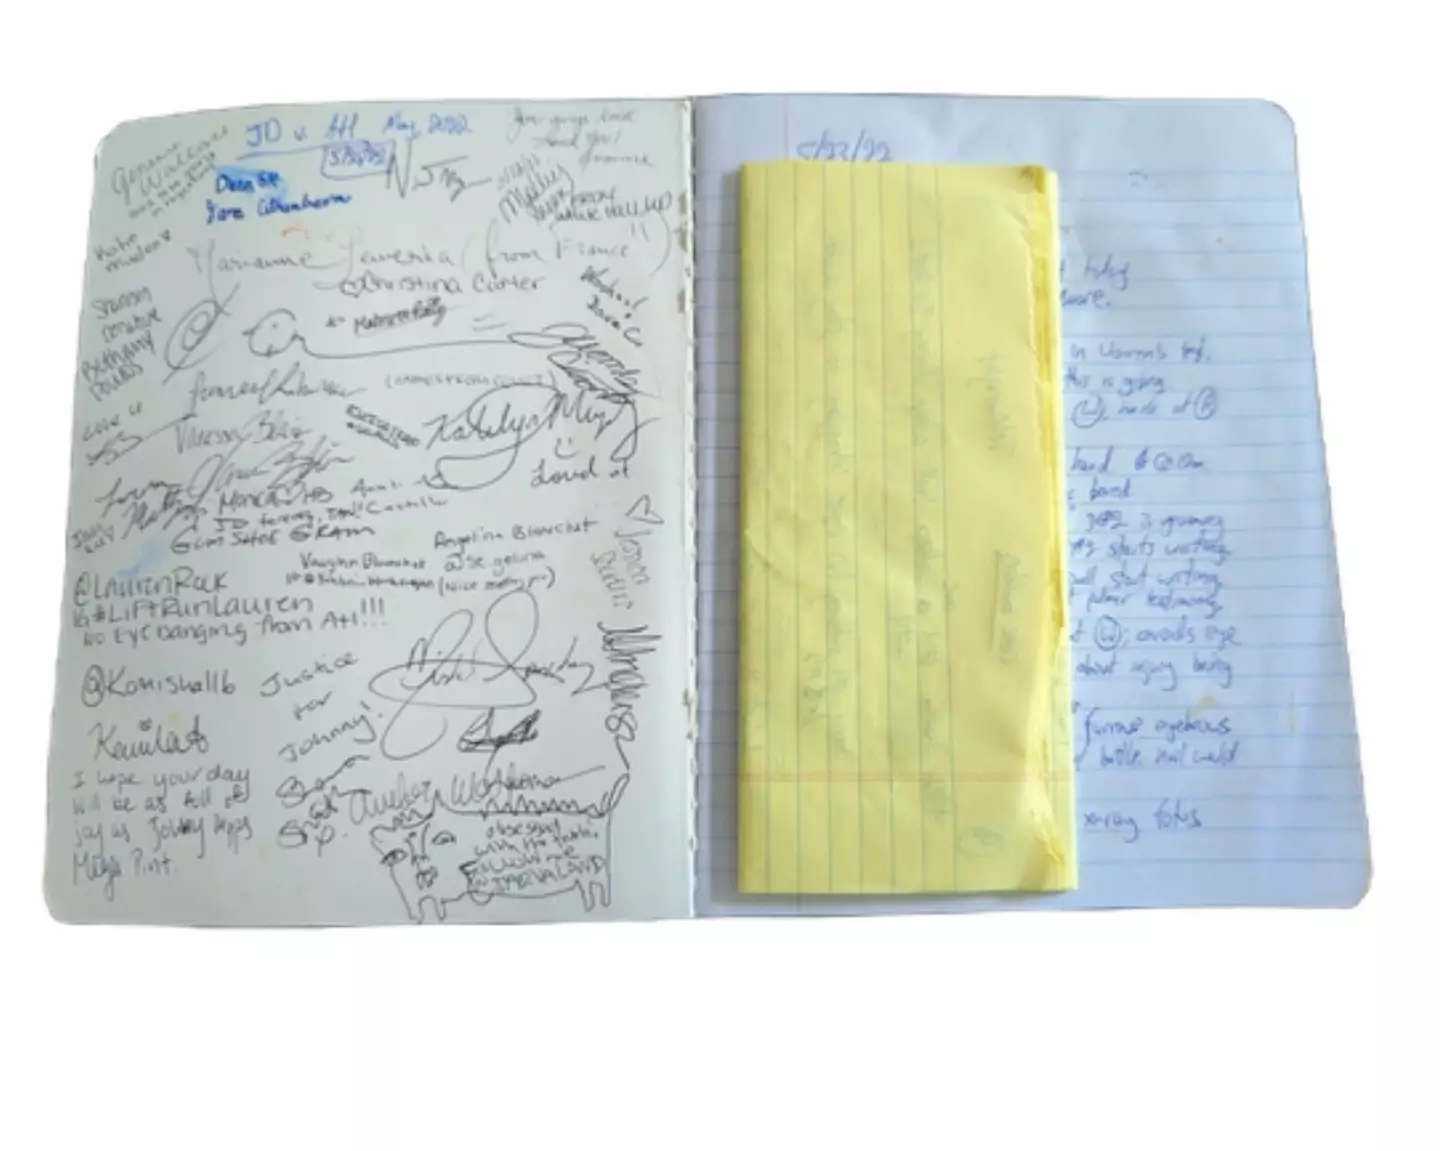 At the time of writing, the notebook is currently on sale for over $14,000.